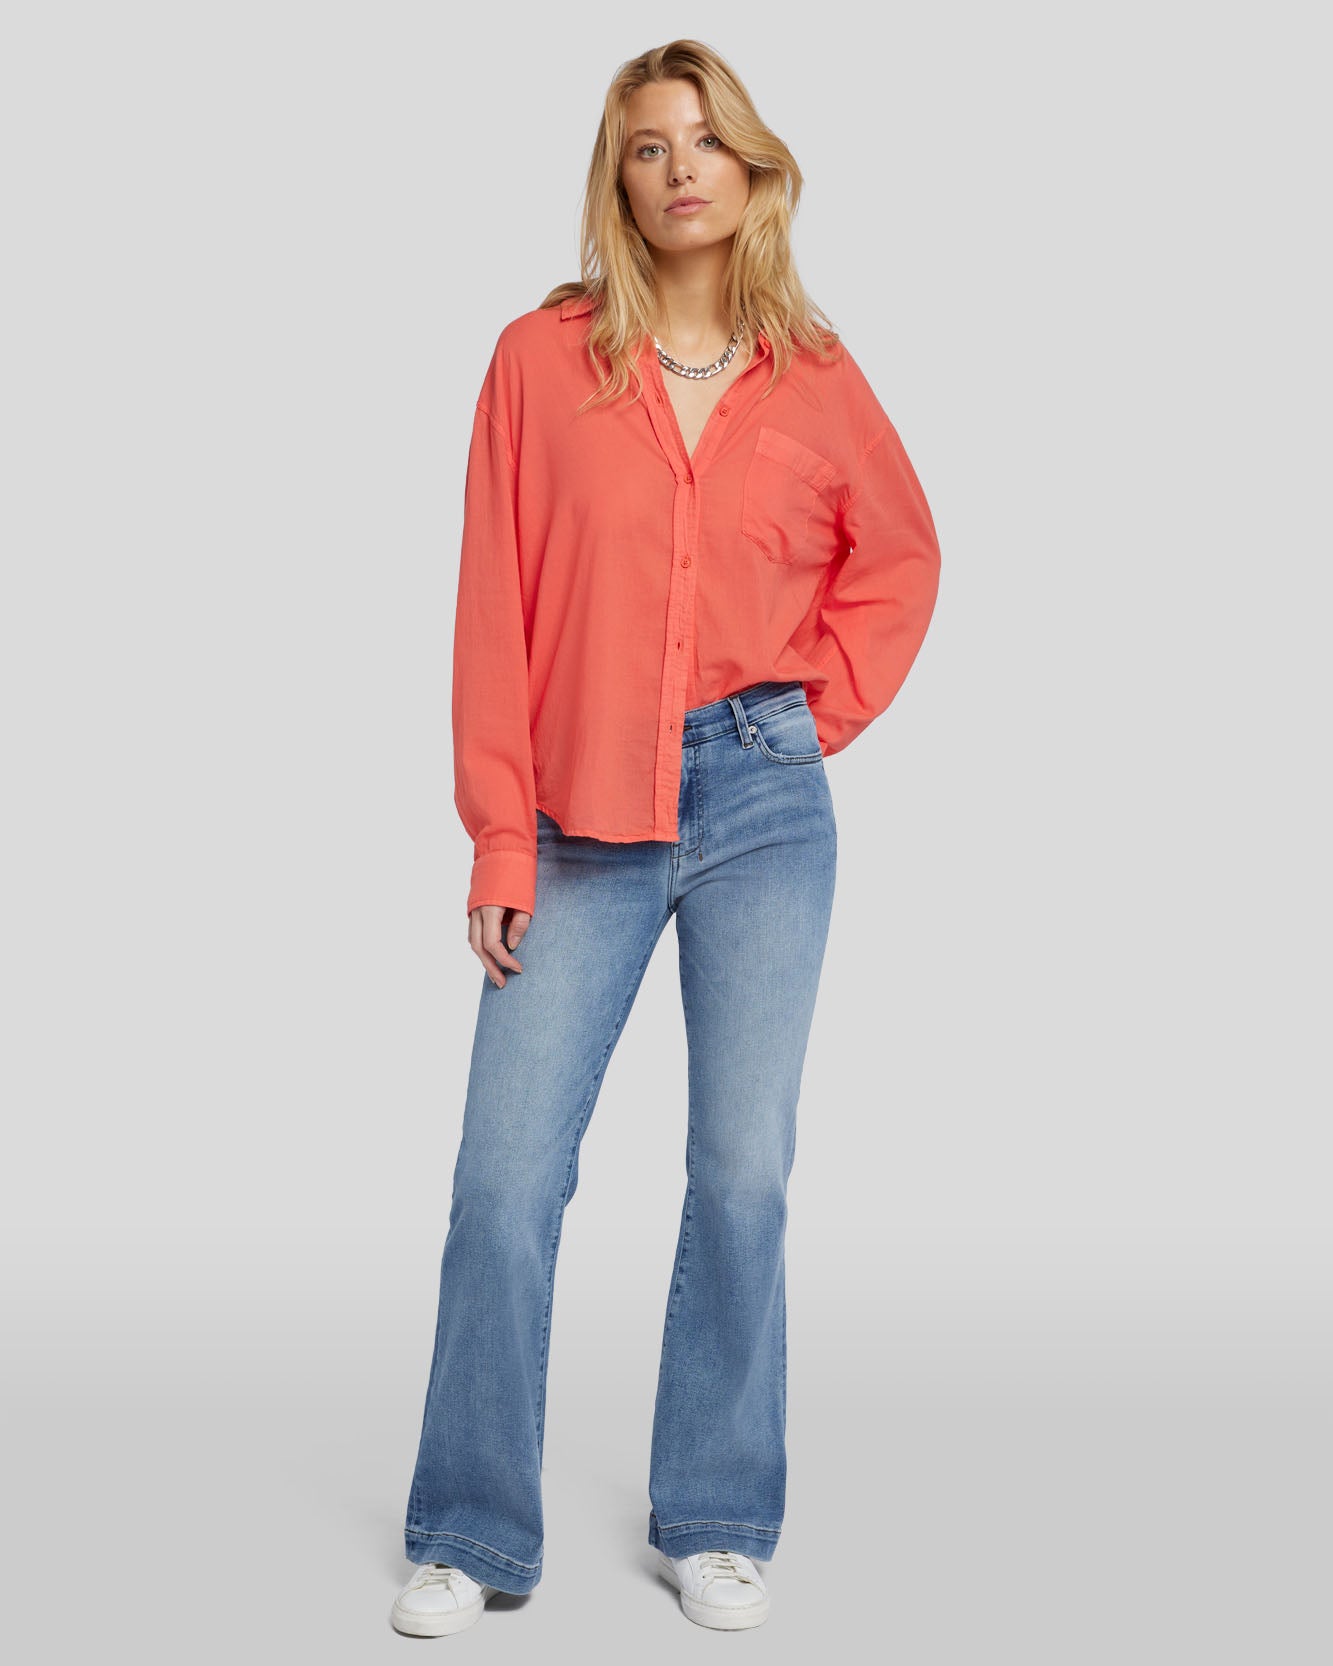 Mid Rise  Women's Size 8 jeans at Seven7 Jeans